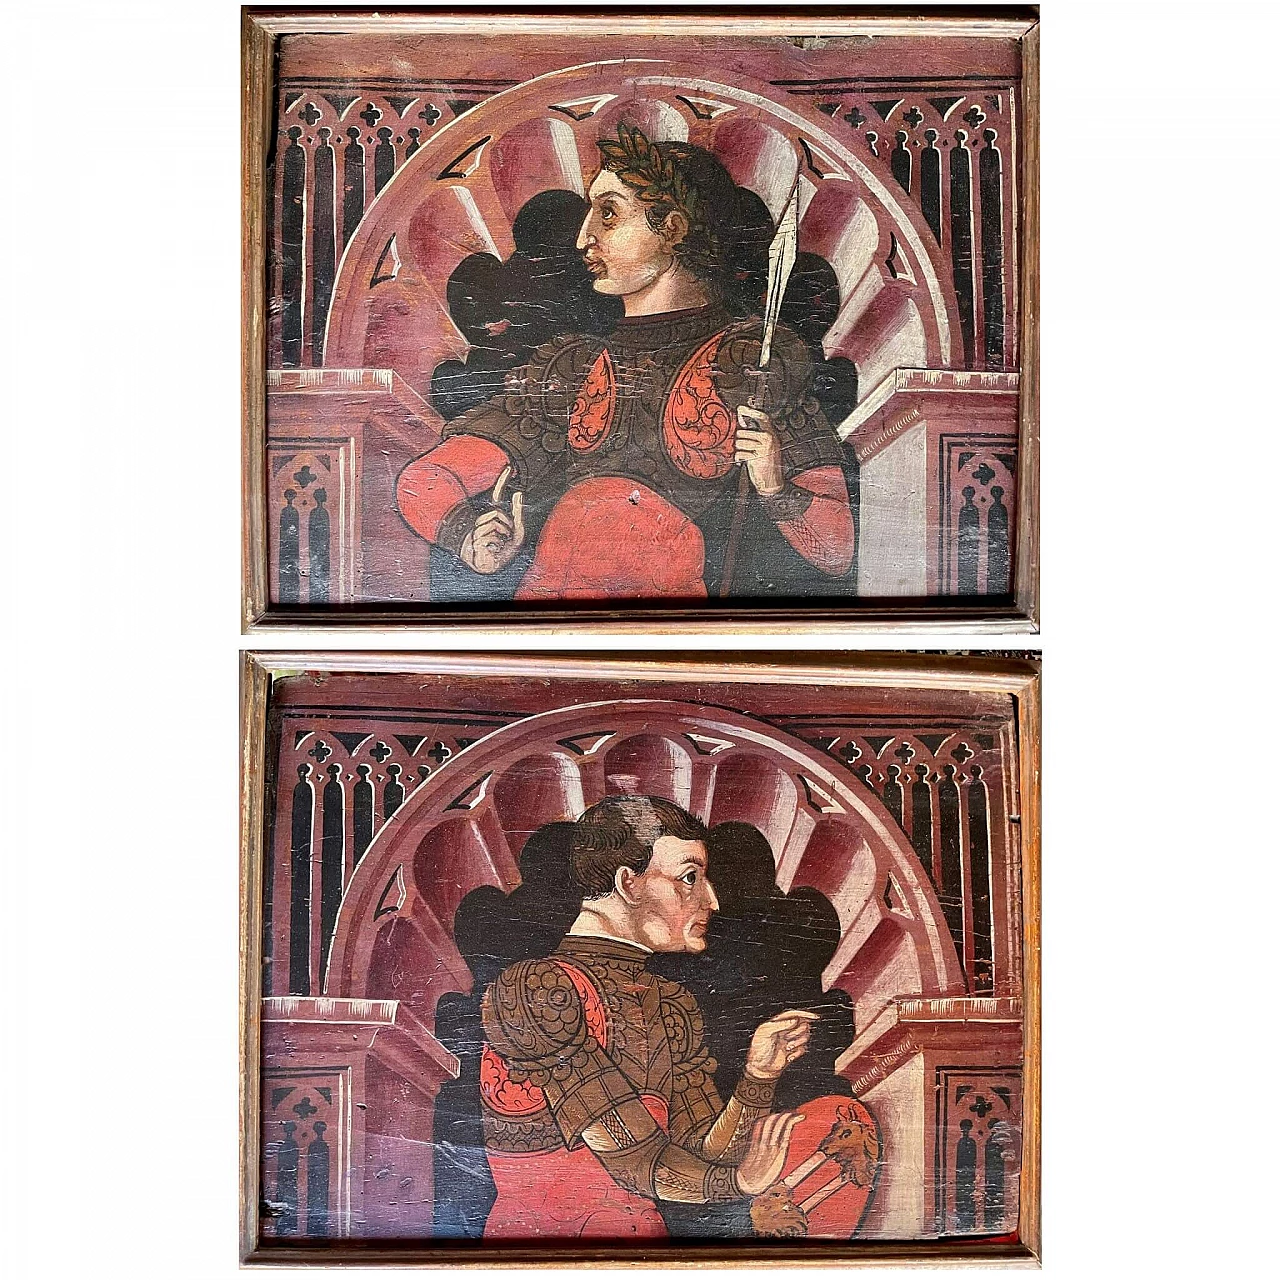 Pair of paintings of warriors, tempera on panel, early 17th century 15